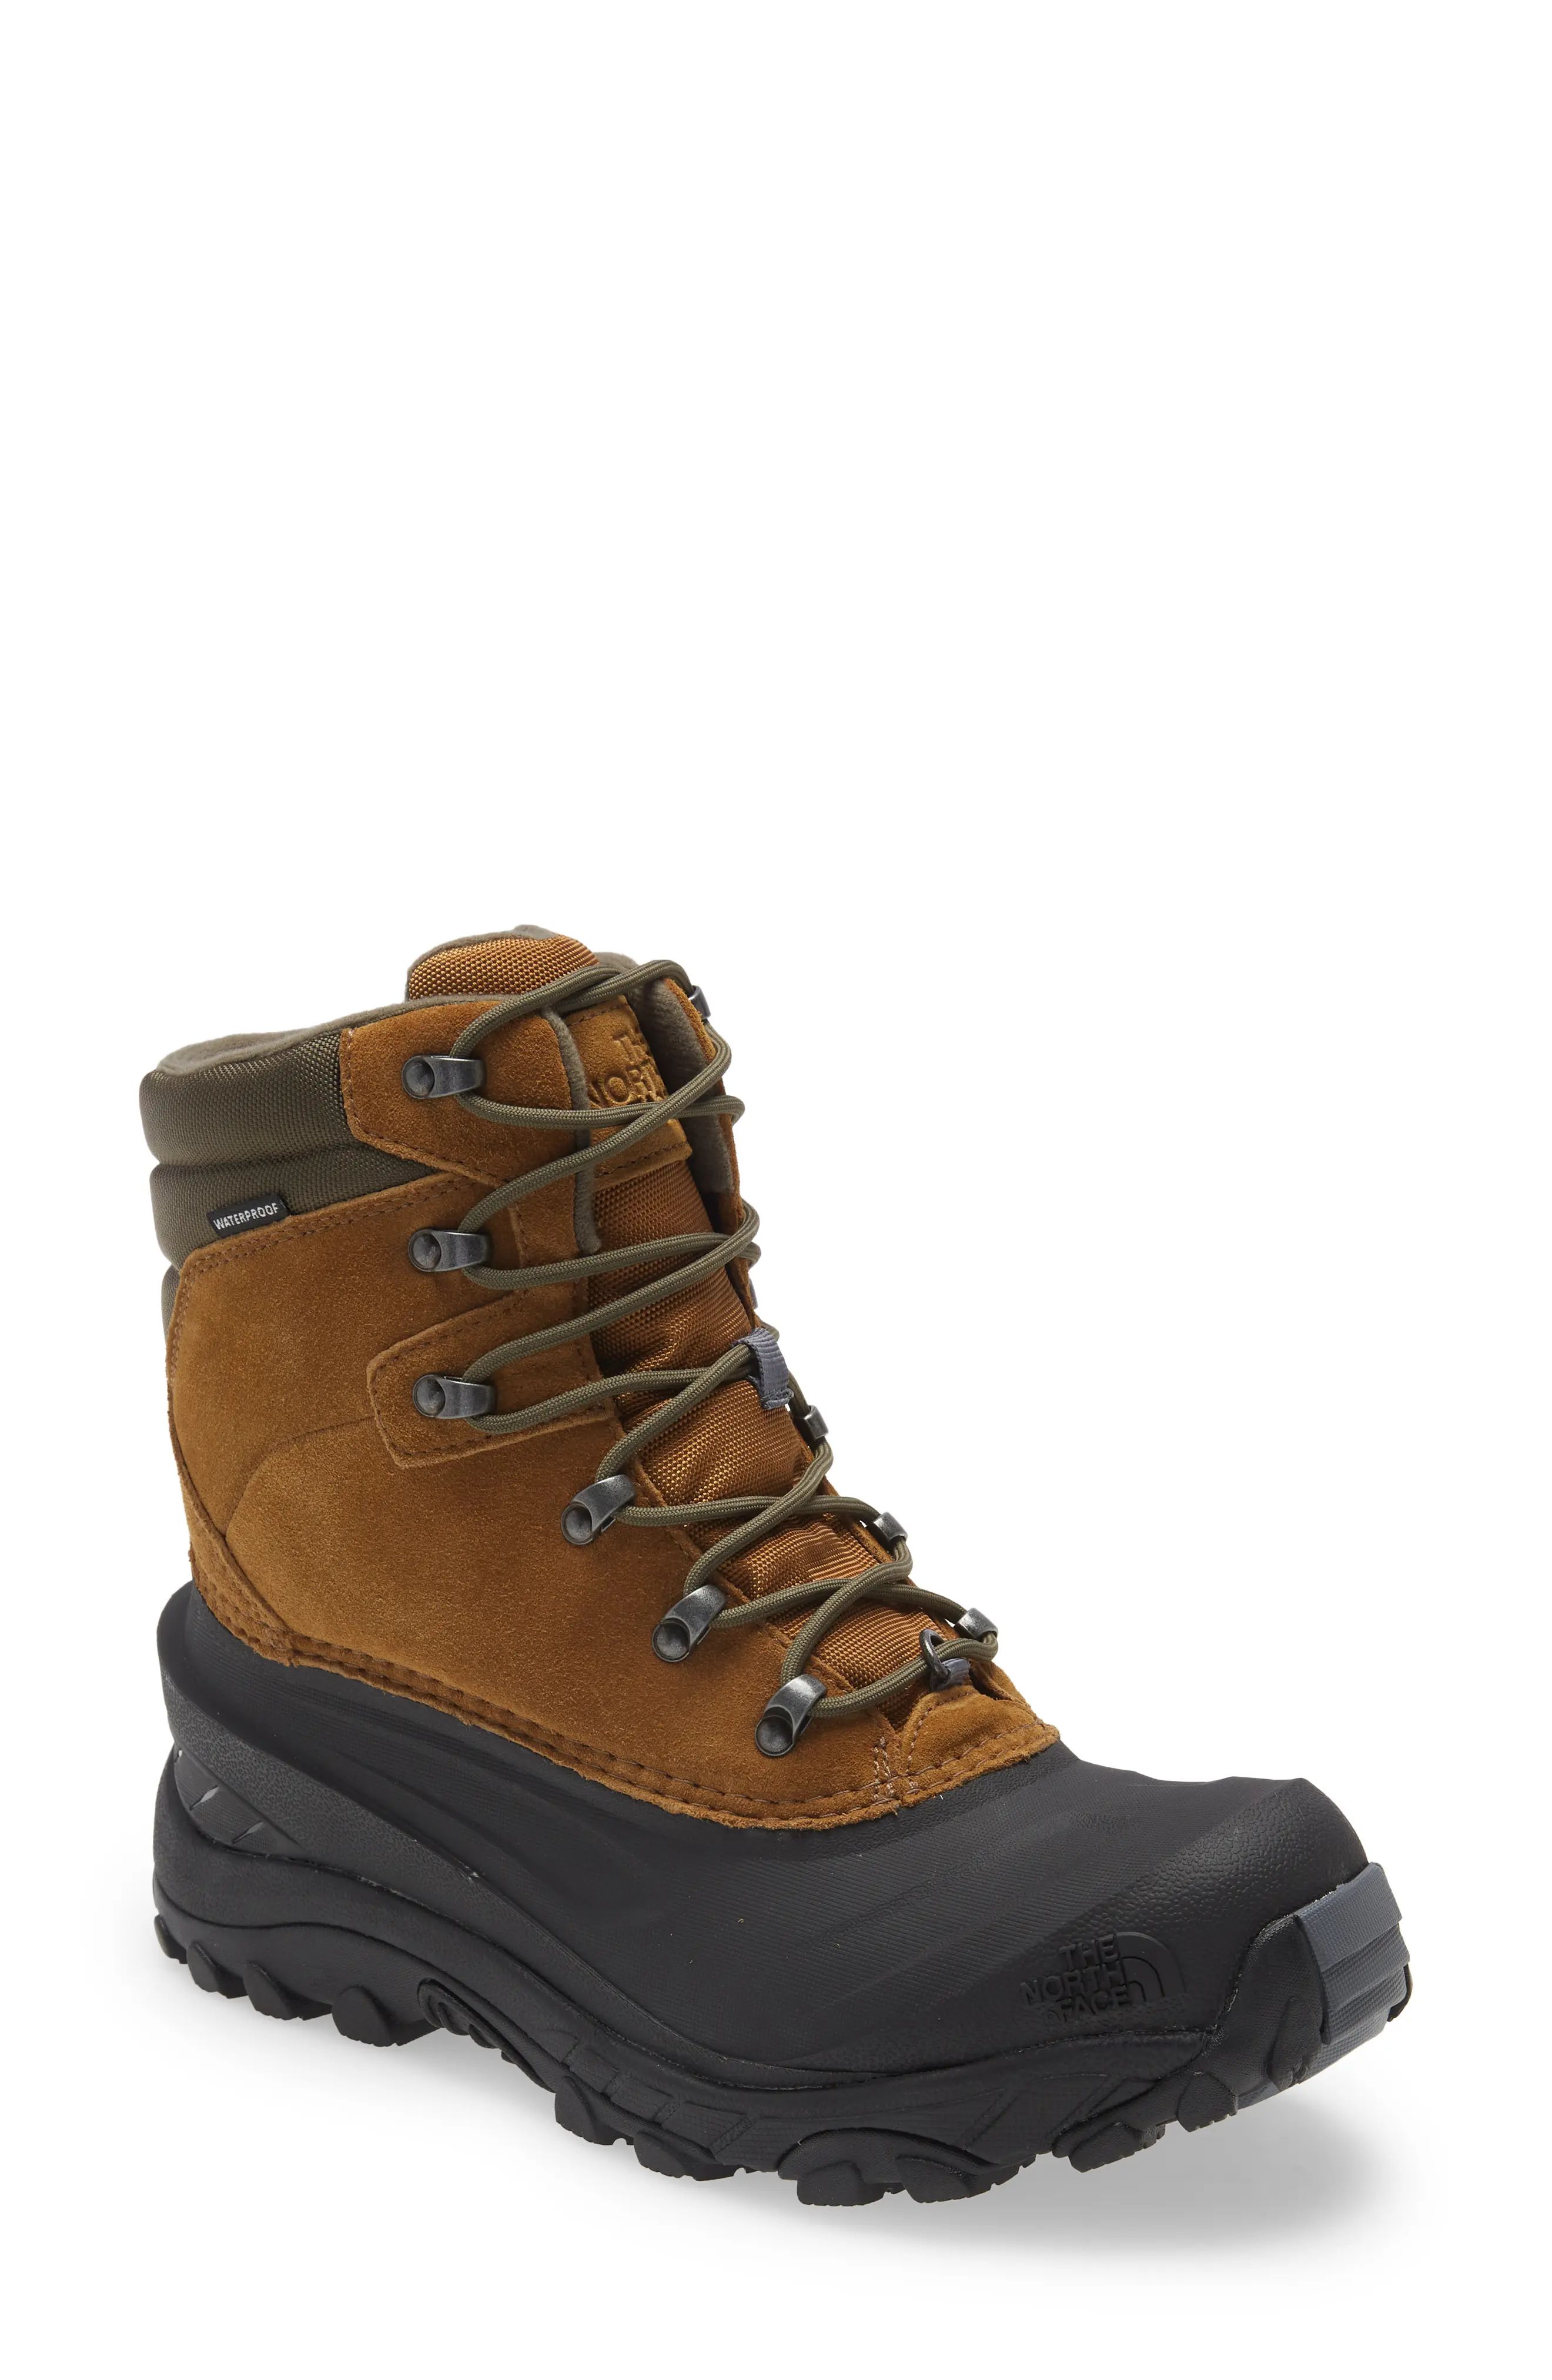 The North Face Chilkat IV Waterproof Insulated Snow Boot, Size 8 in Brown/Green at Nordstrom | Nordstrom